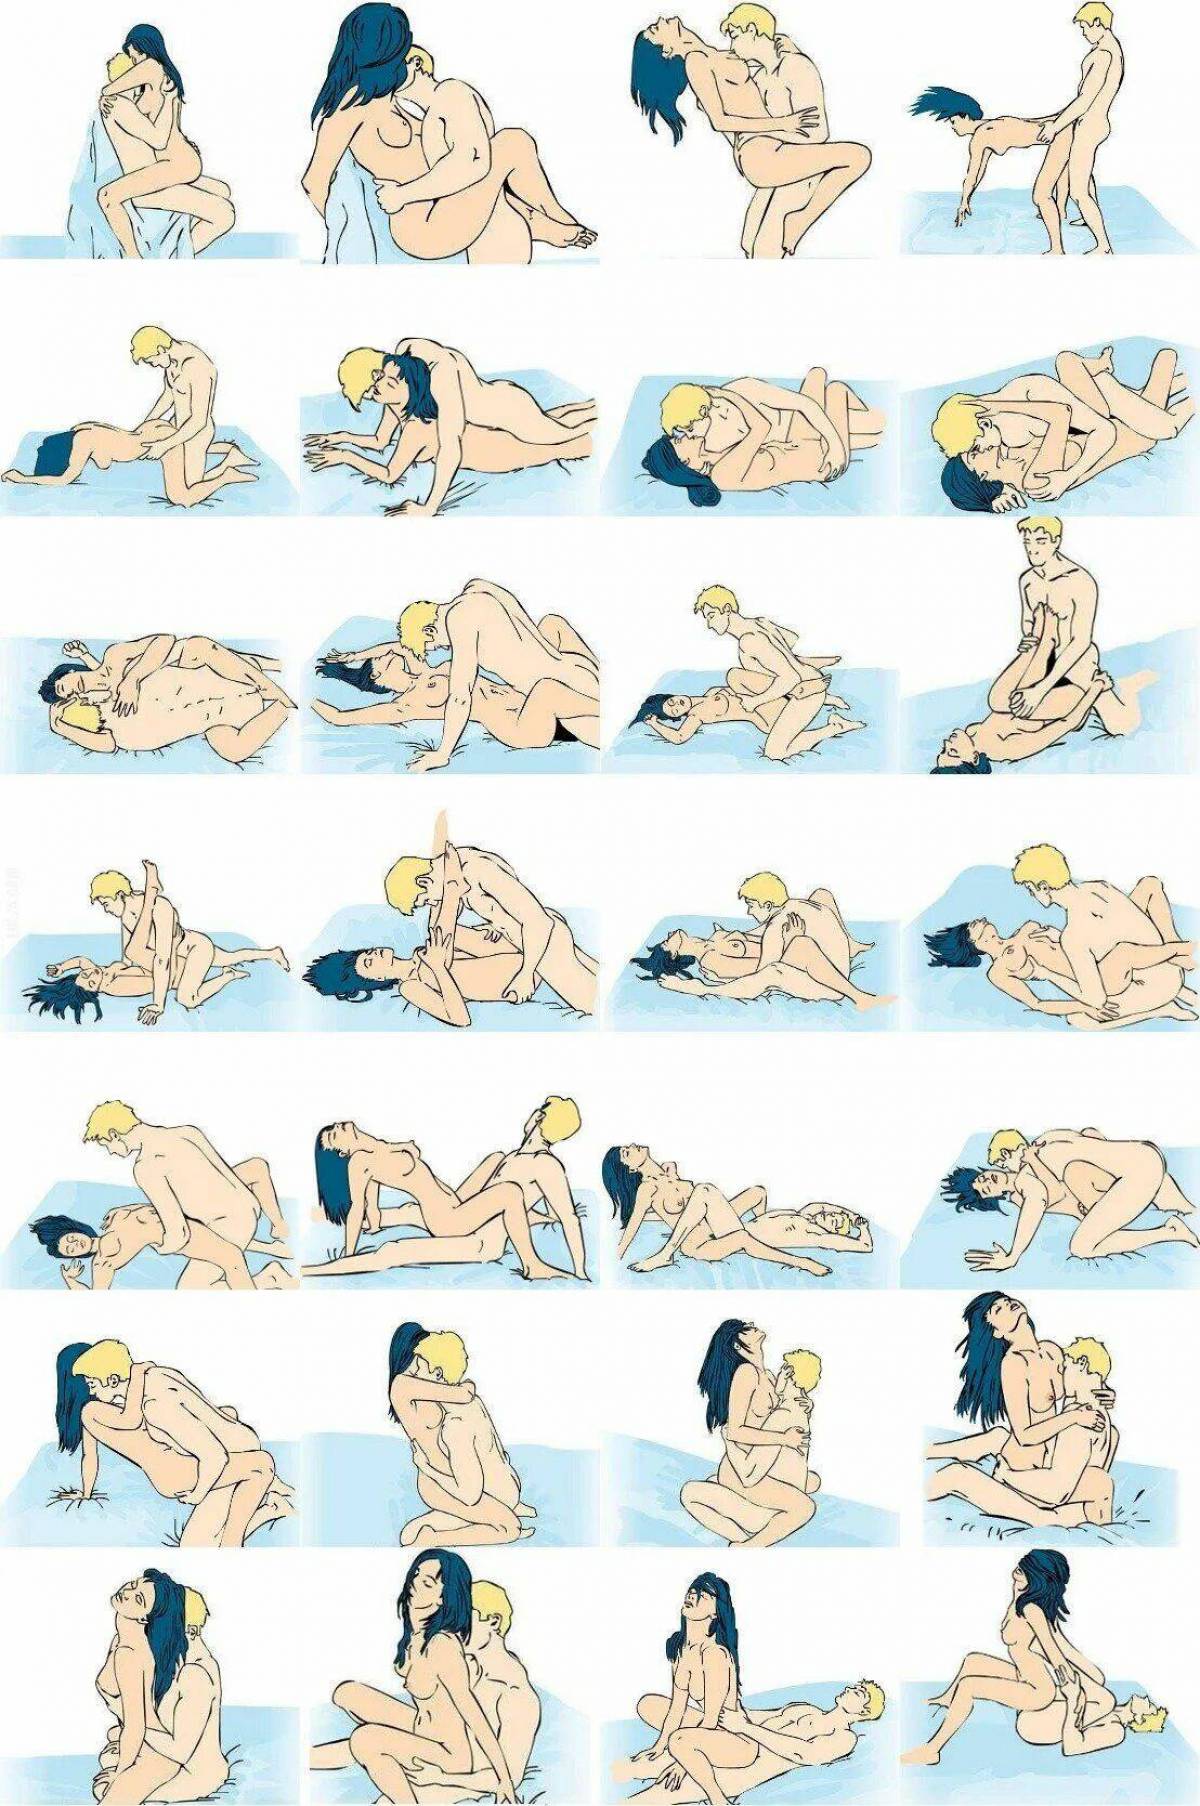 Different porn positions